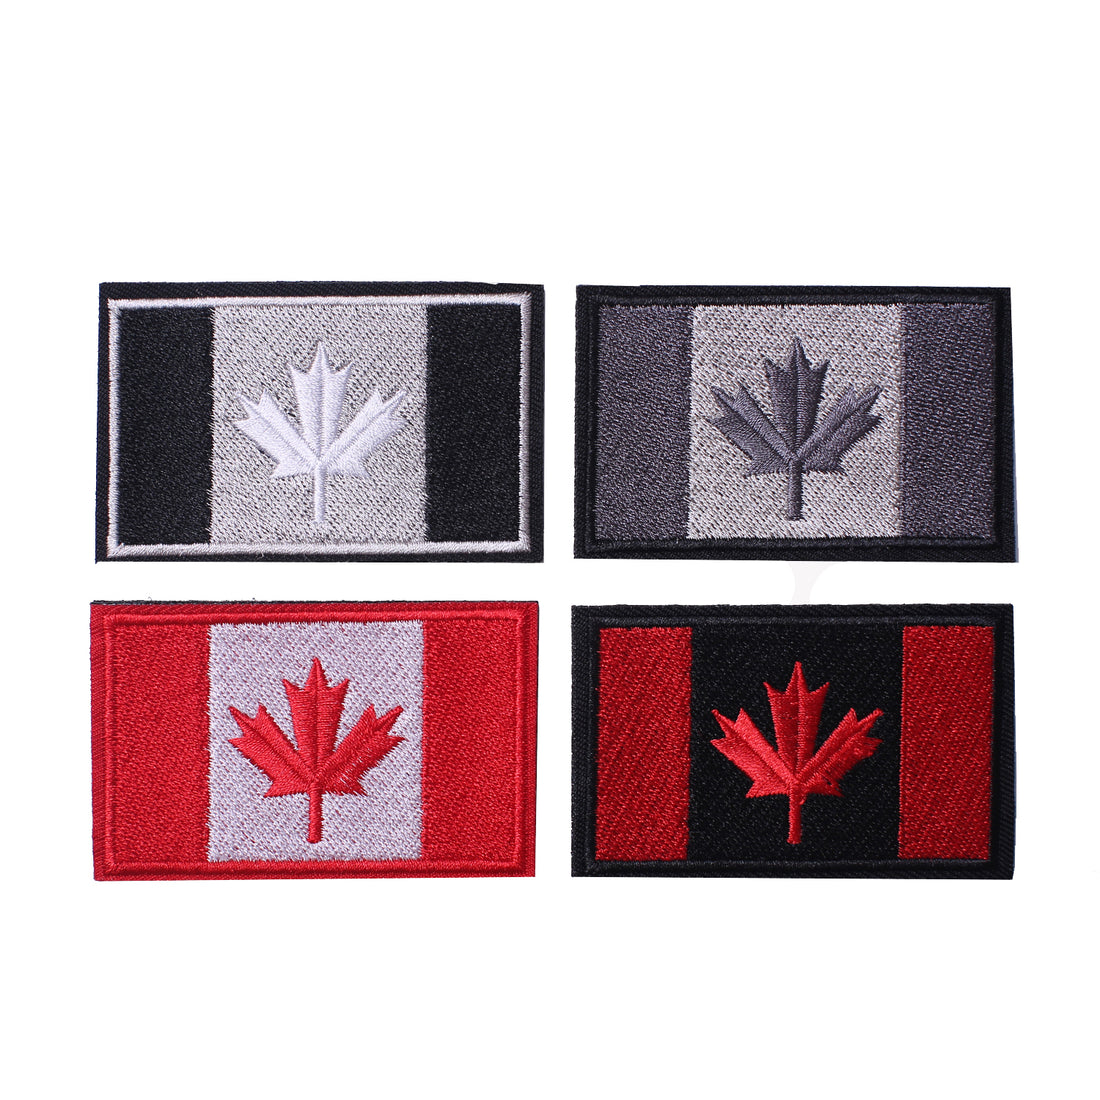 Canadian Flag Patches, Assorted Canada Maple Leaf 2x3 Inch Velcro Hook Loop Sticker Patch for Backpacks Hats Jackets, Set of 4